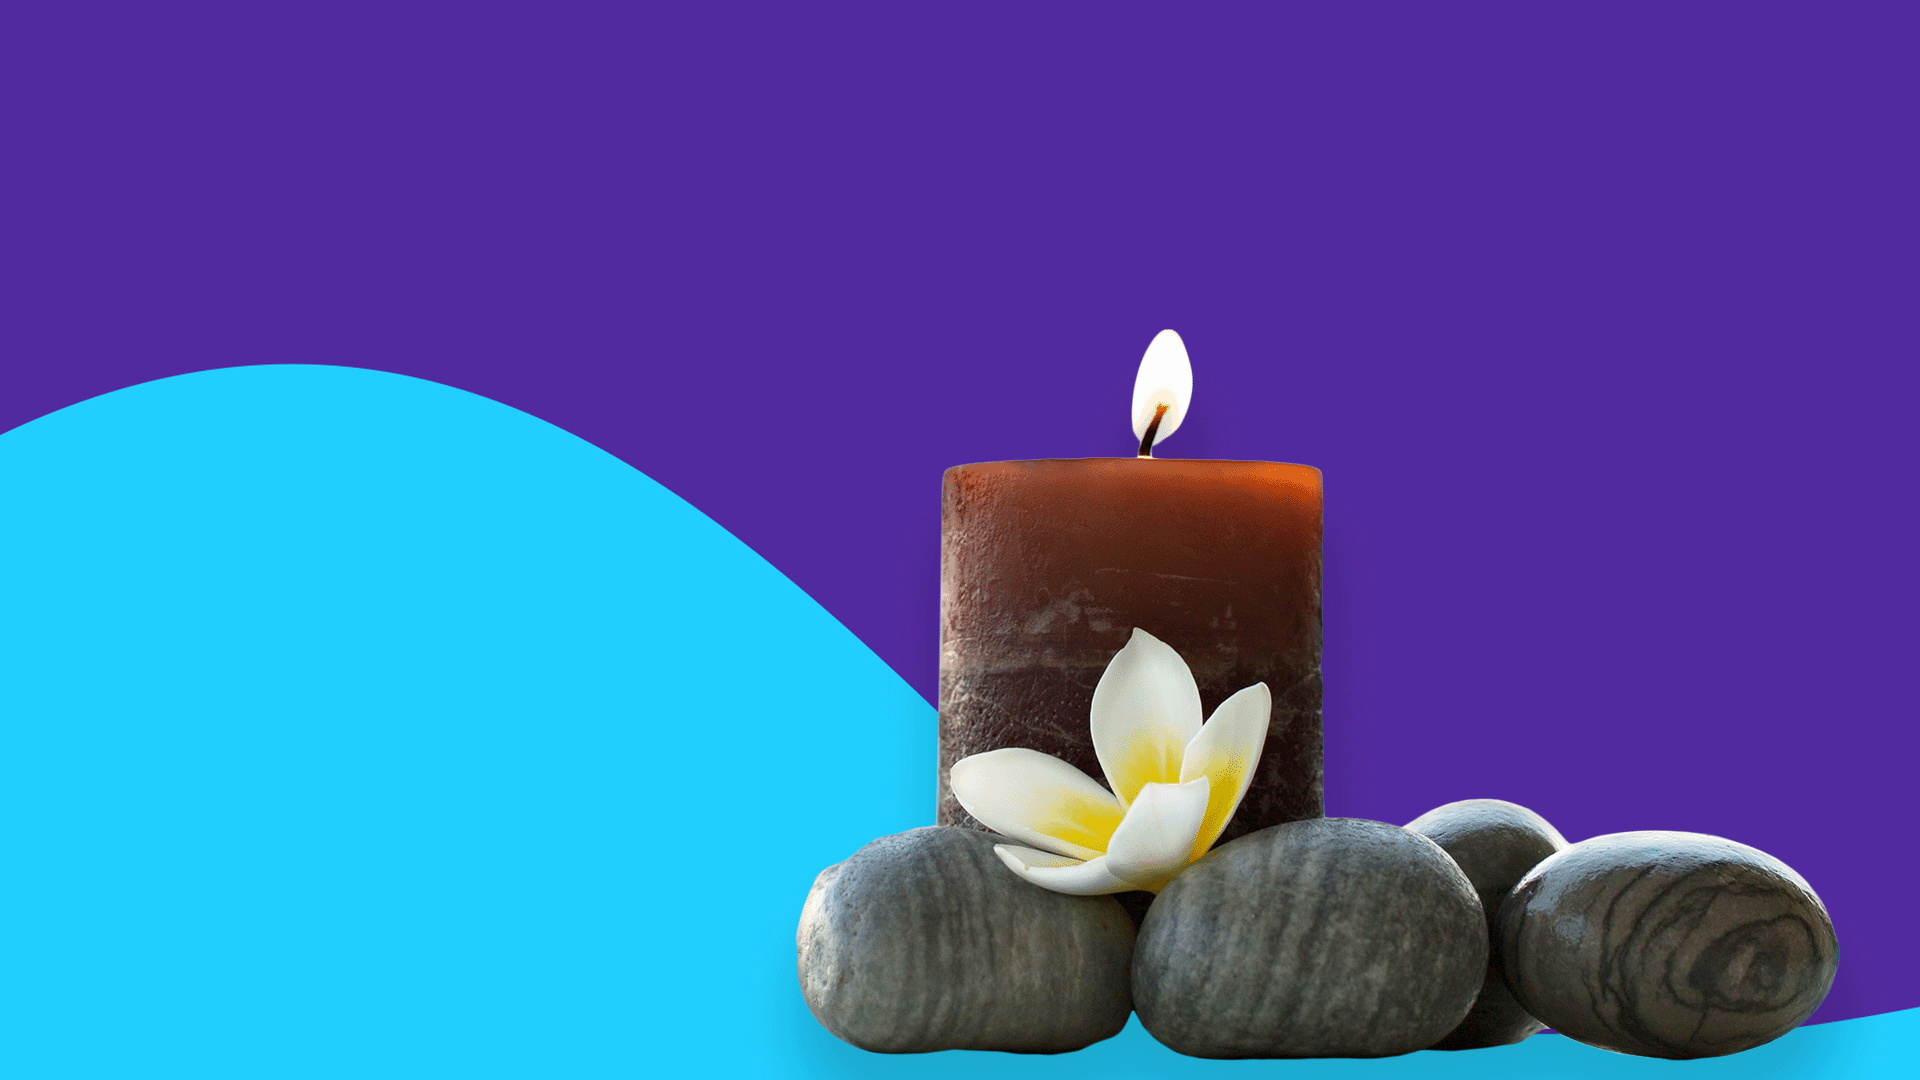 Candle and stones in a zen setting - Natural remedies for anxiety